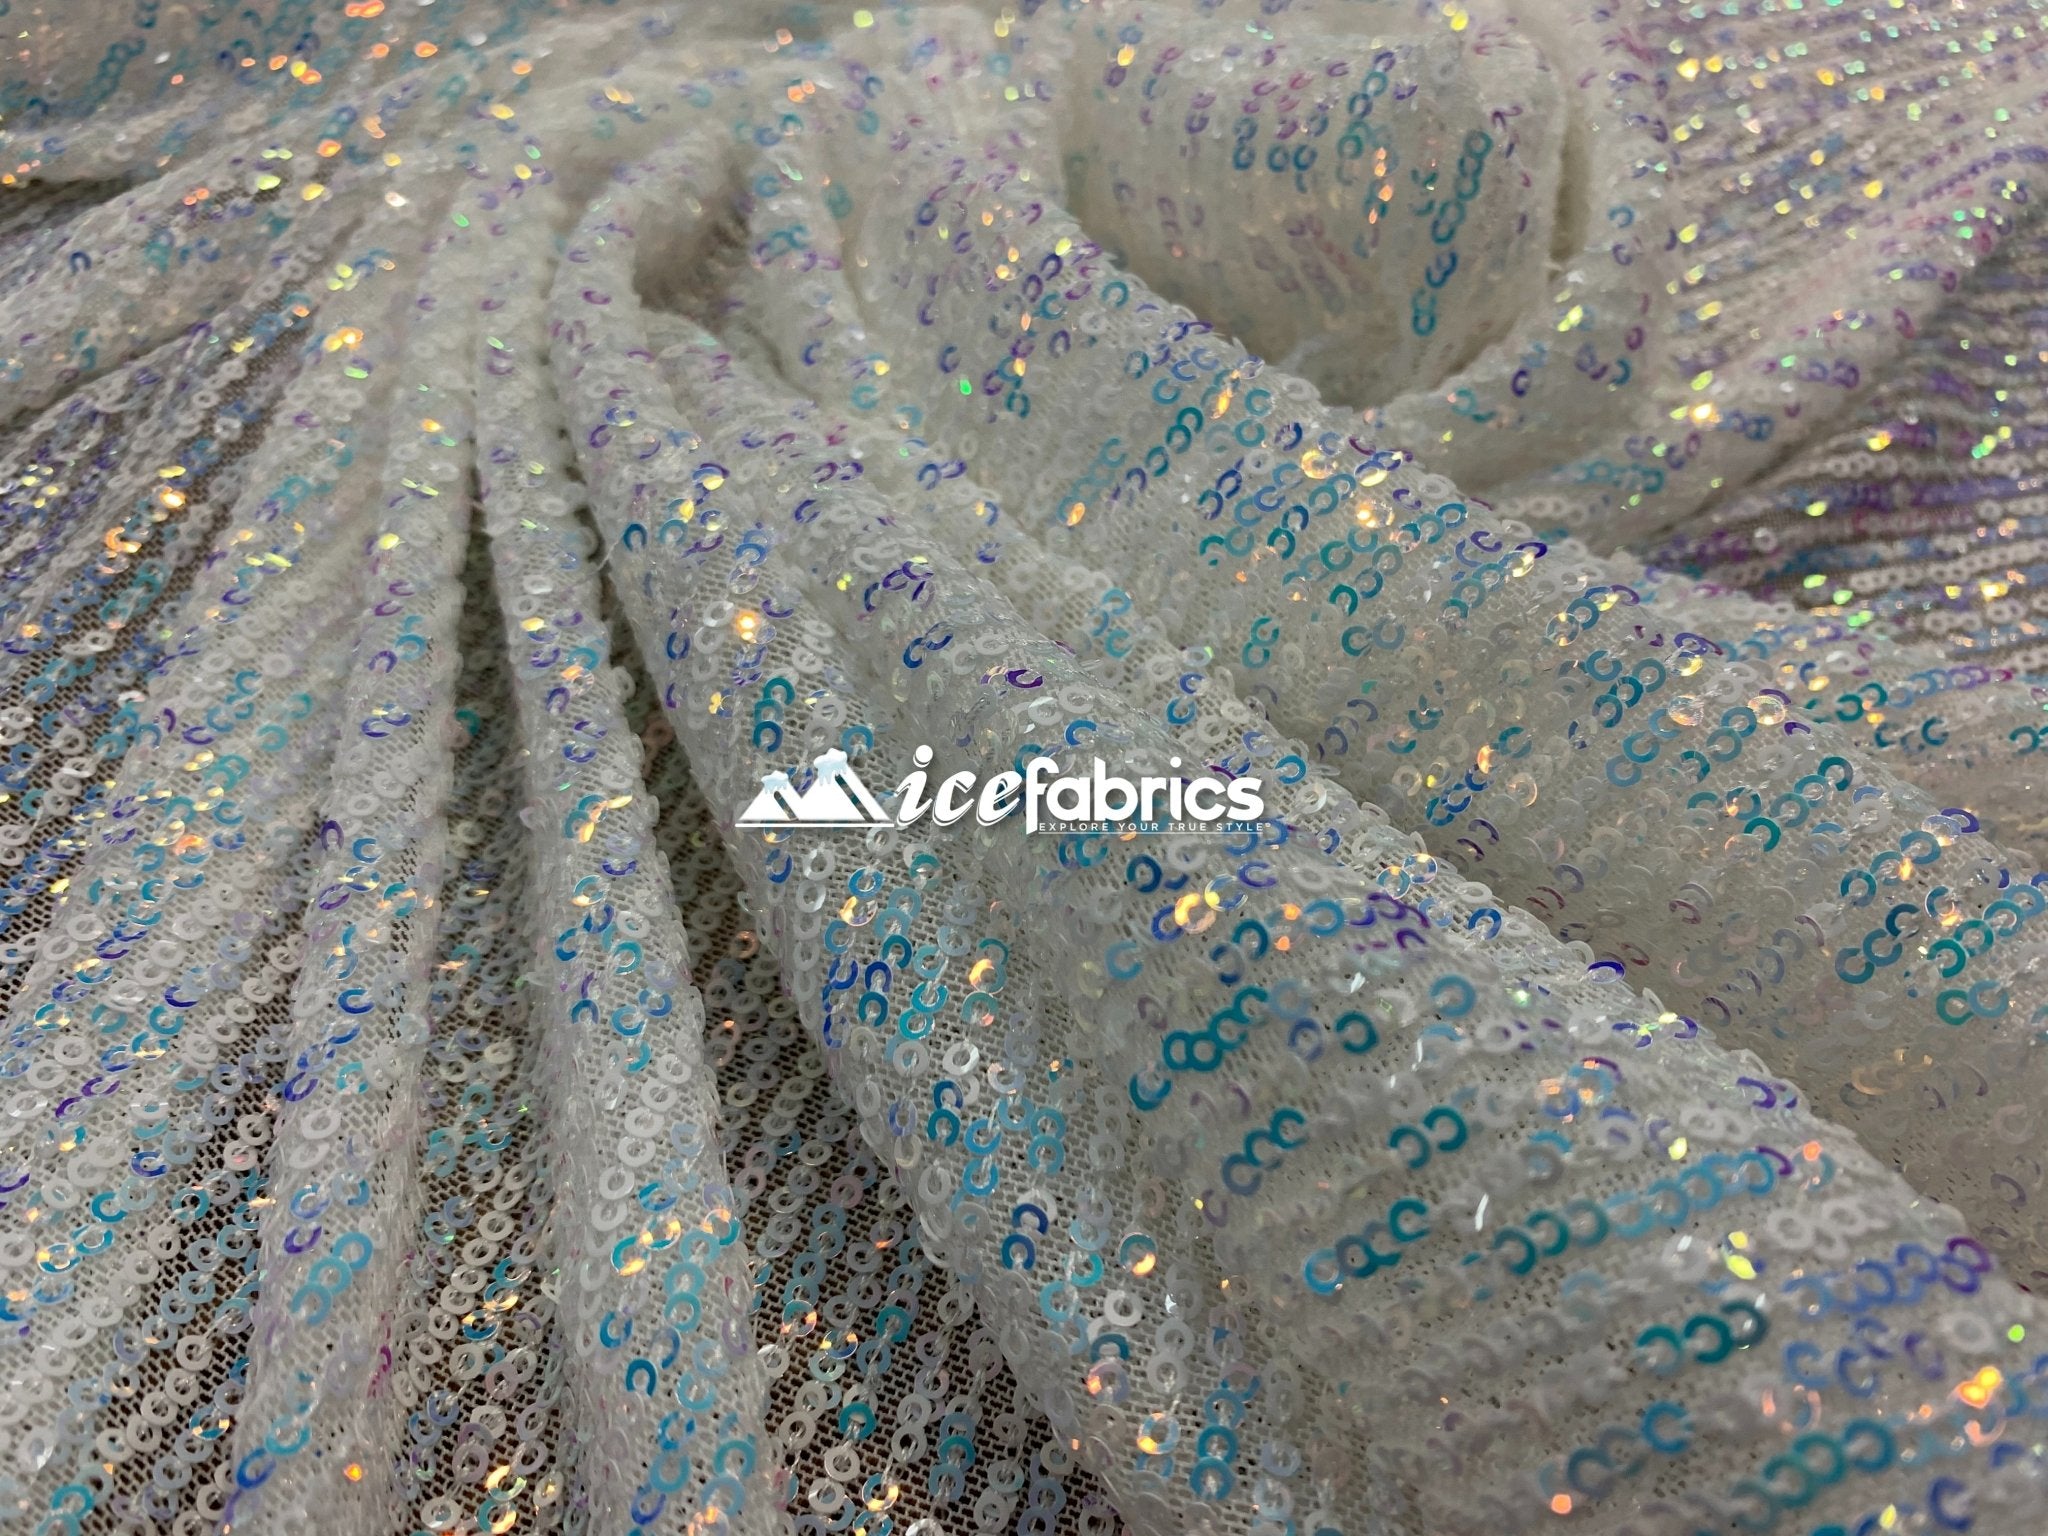 Iridescent Sequin 2 Way Mesh Stretch Sequins Fabric By The YardICEFABRICICE FABRICSWhite Blue IridescentIridescent Sequin 2 Way Mesh Stretch Sequins Fabric By The Yard ICEFABRIC White Blue Iridescent